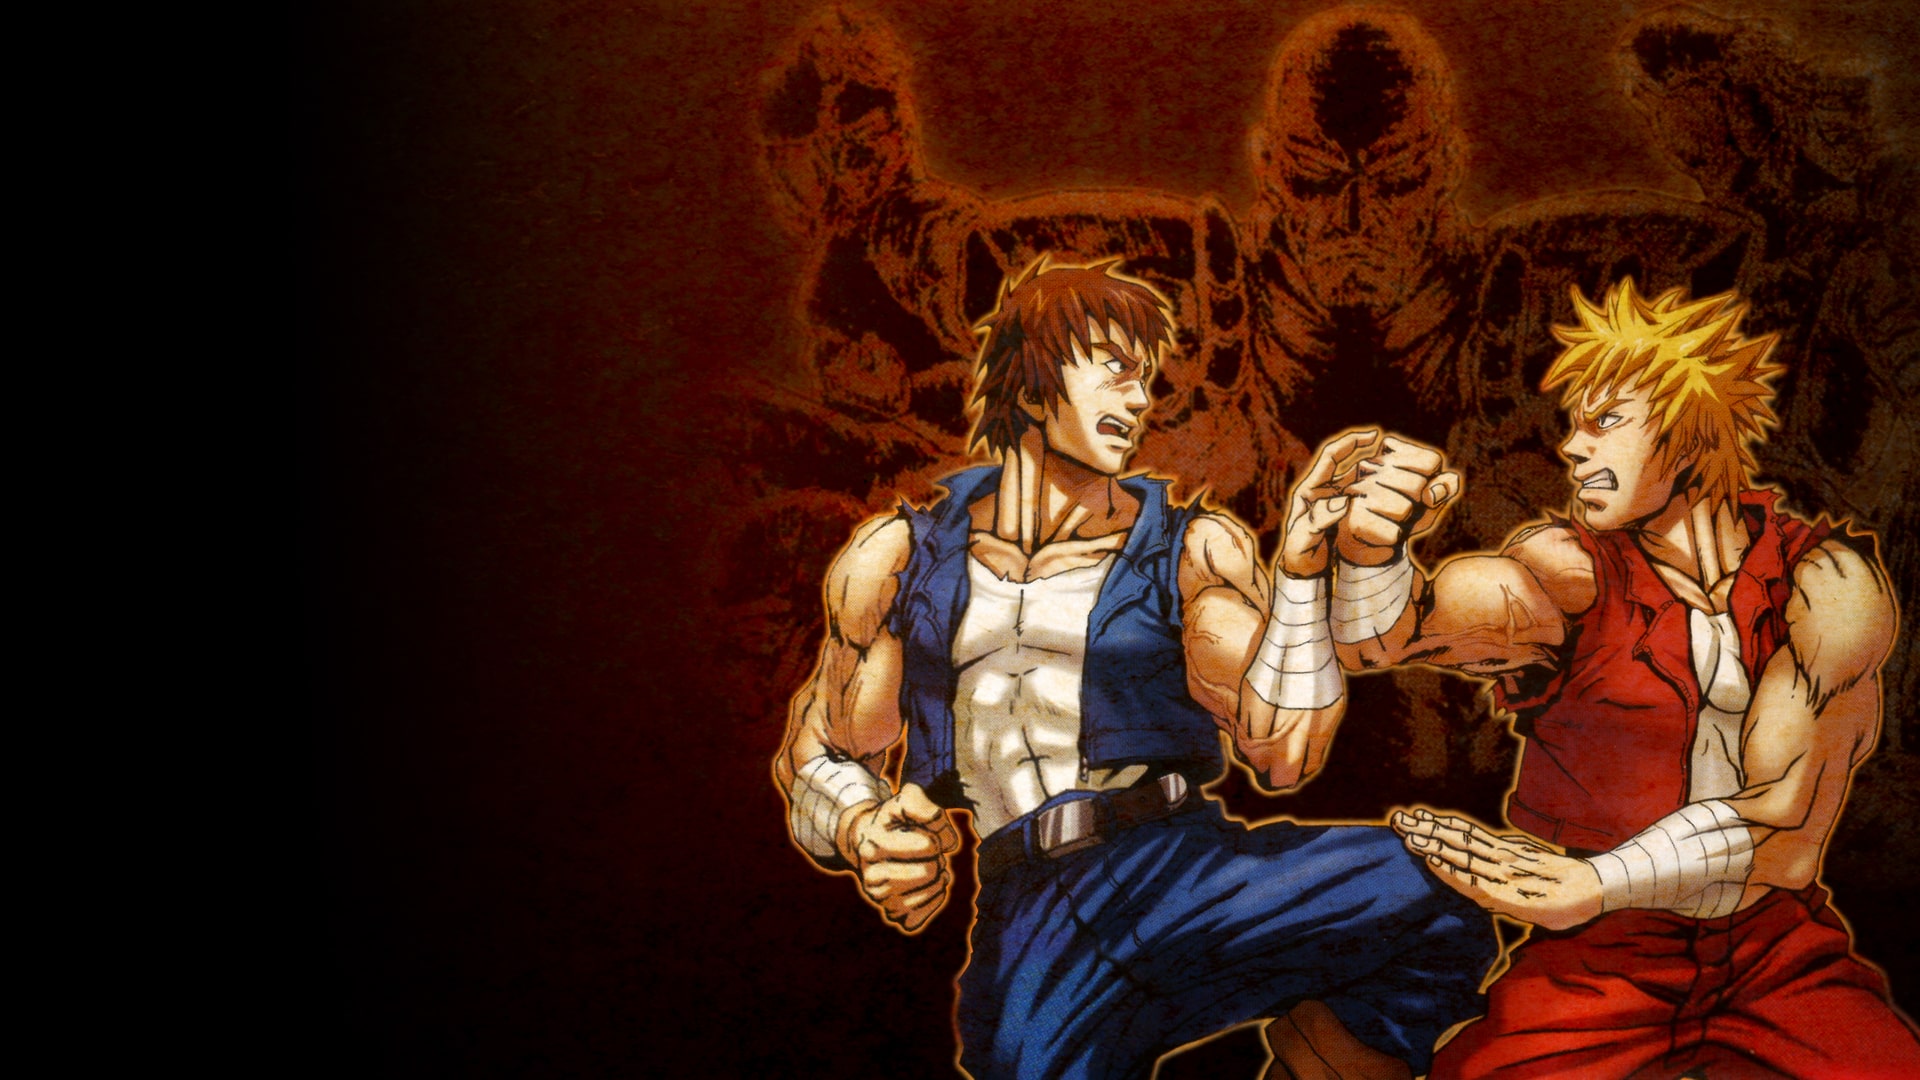 Double Dragon Advance PS4 — buy online and track price history